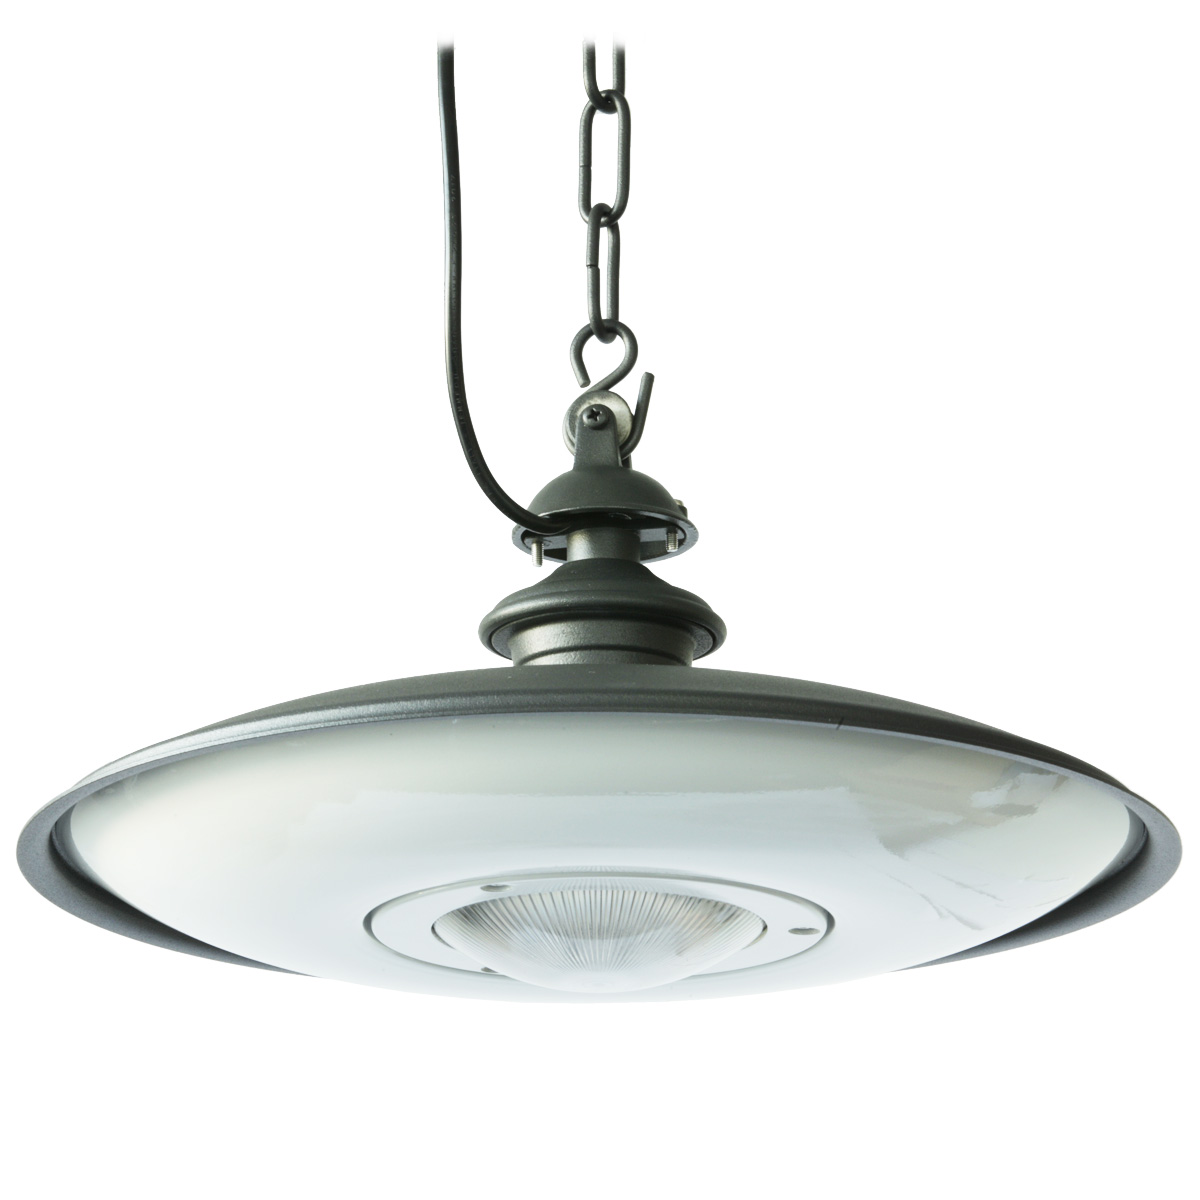 LED Hanging Light with Chain (Protection Class IP65)